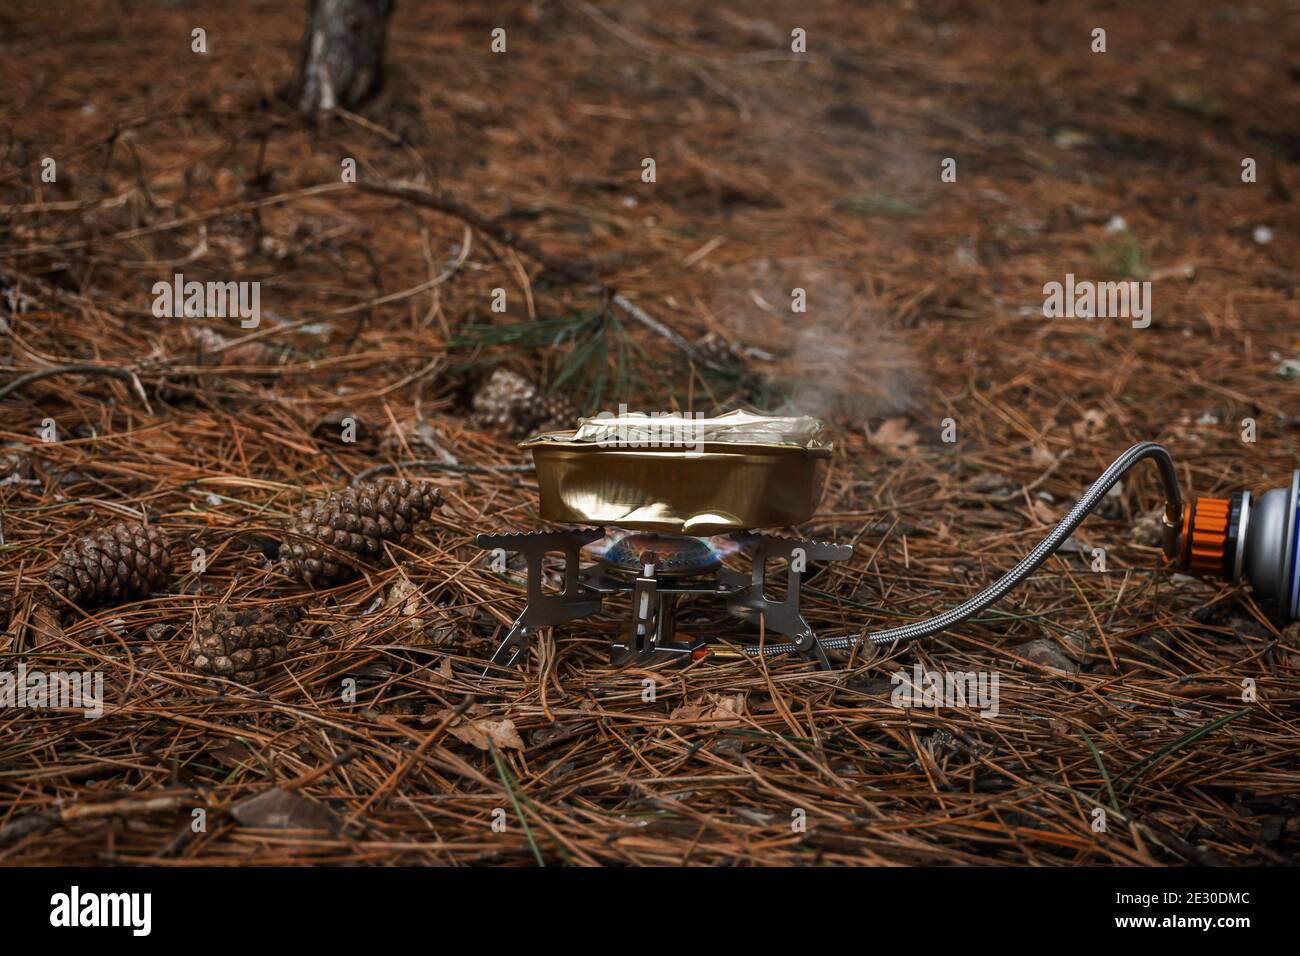 Tourist gas burner for heating food. Open fire close-up. Metal portable small burner in the forest on coniferous litter. The concept of hiking, touris Stock Photo